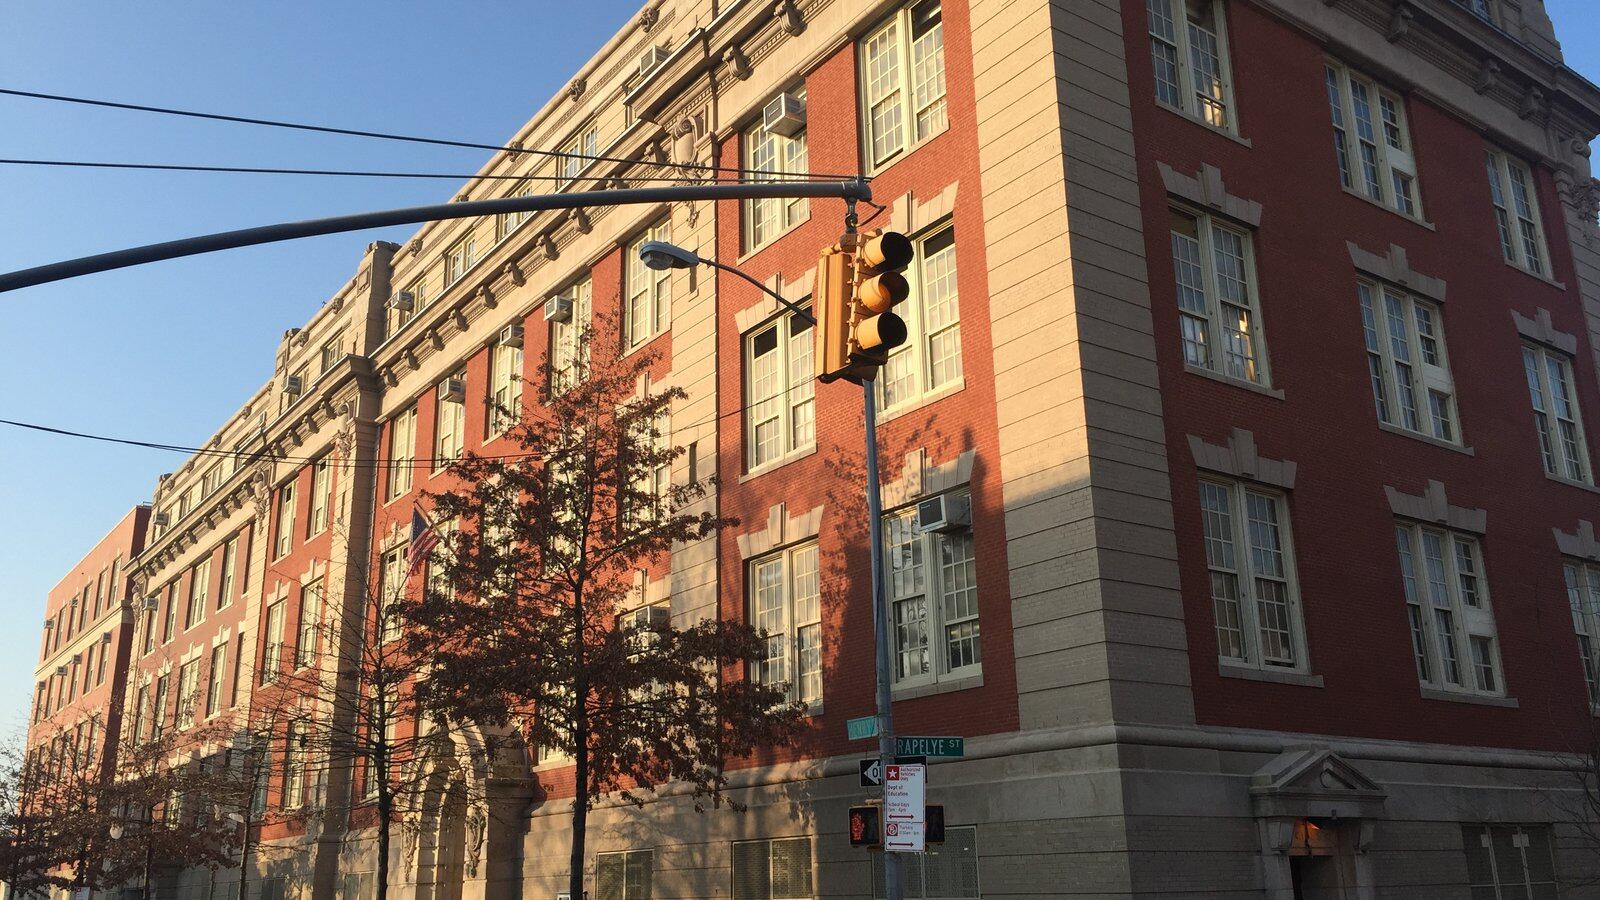 A recent essay in the Atlantic details one family's experience at the Brookyln New School and in District 15.